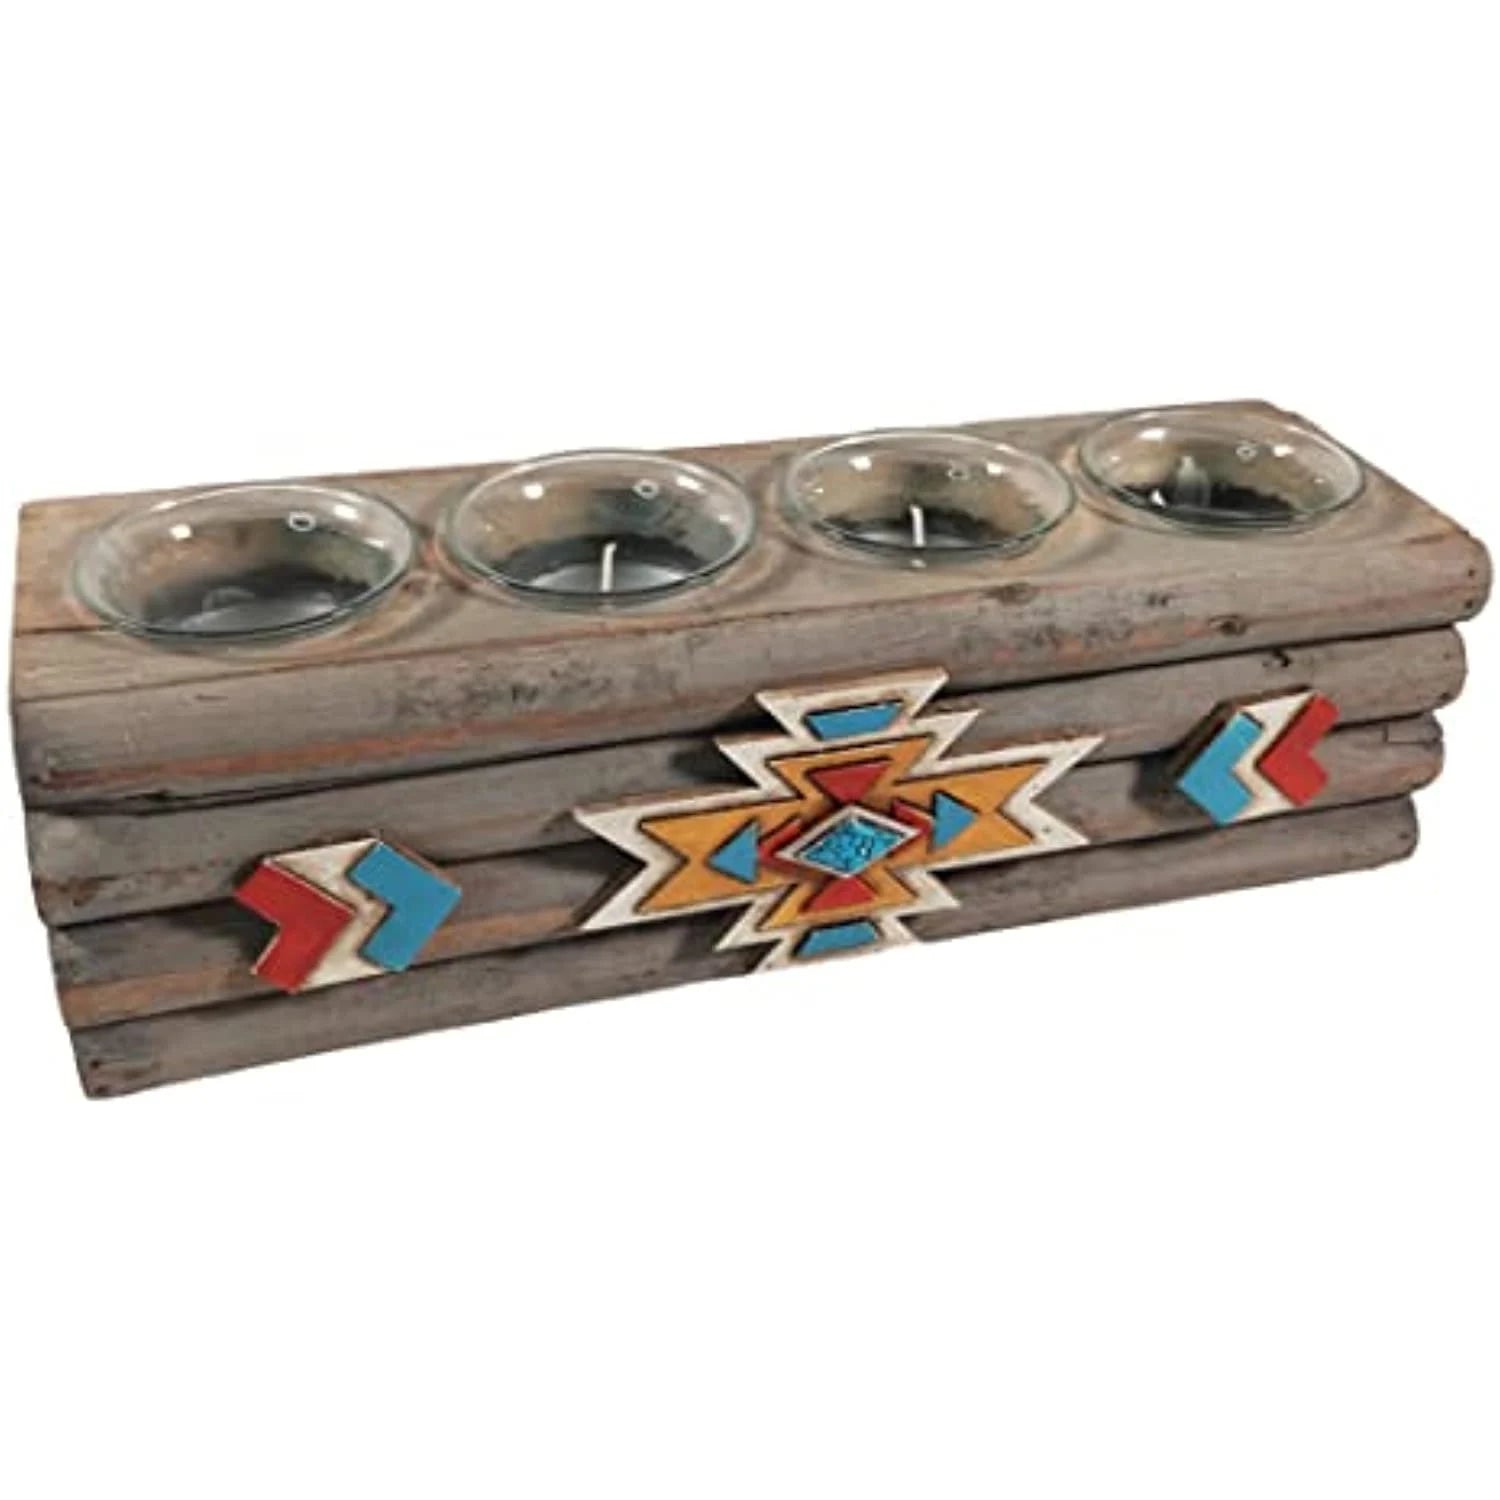 Urbalabs Rustic Aztec Candle Holder